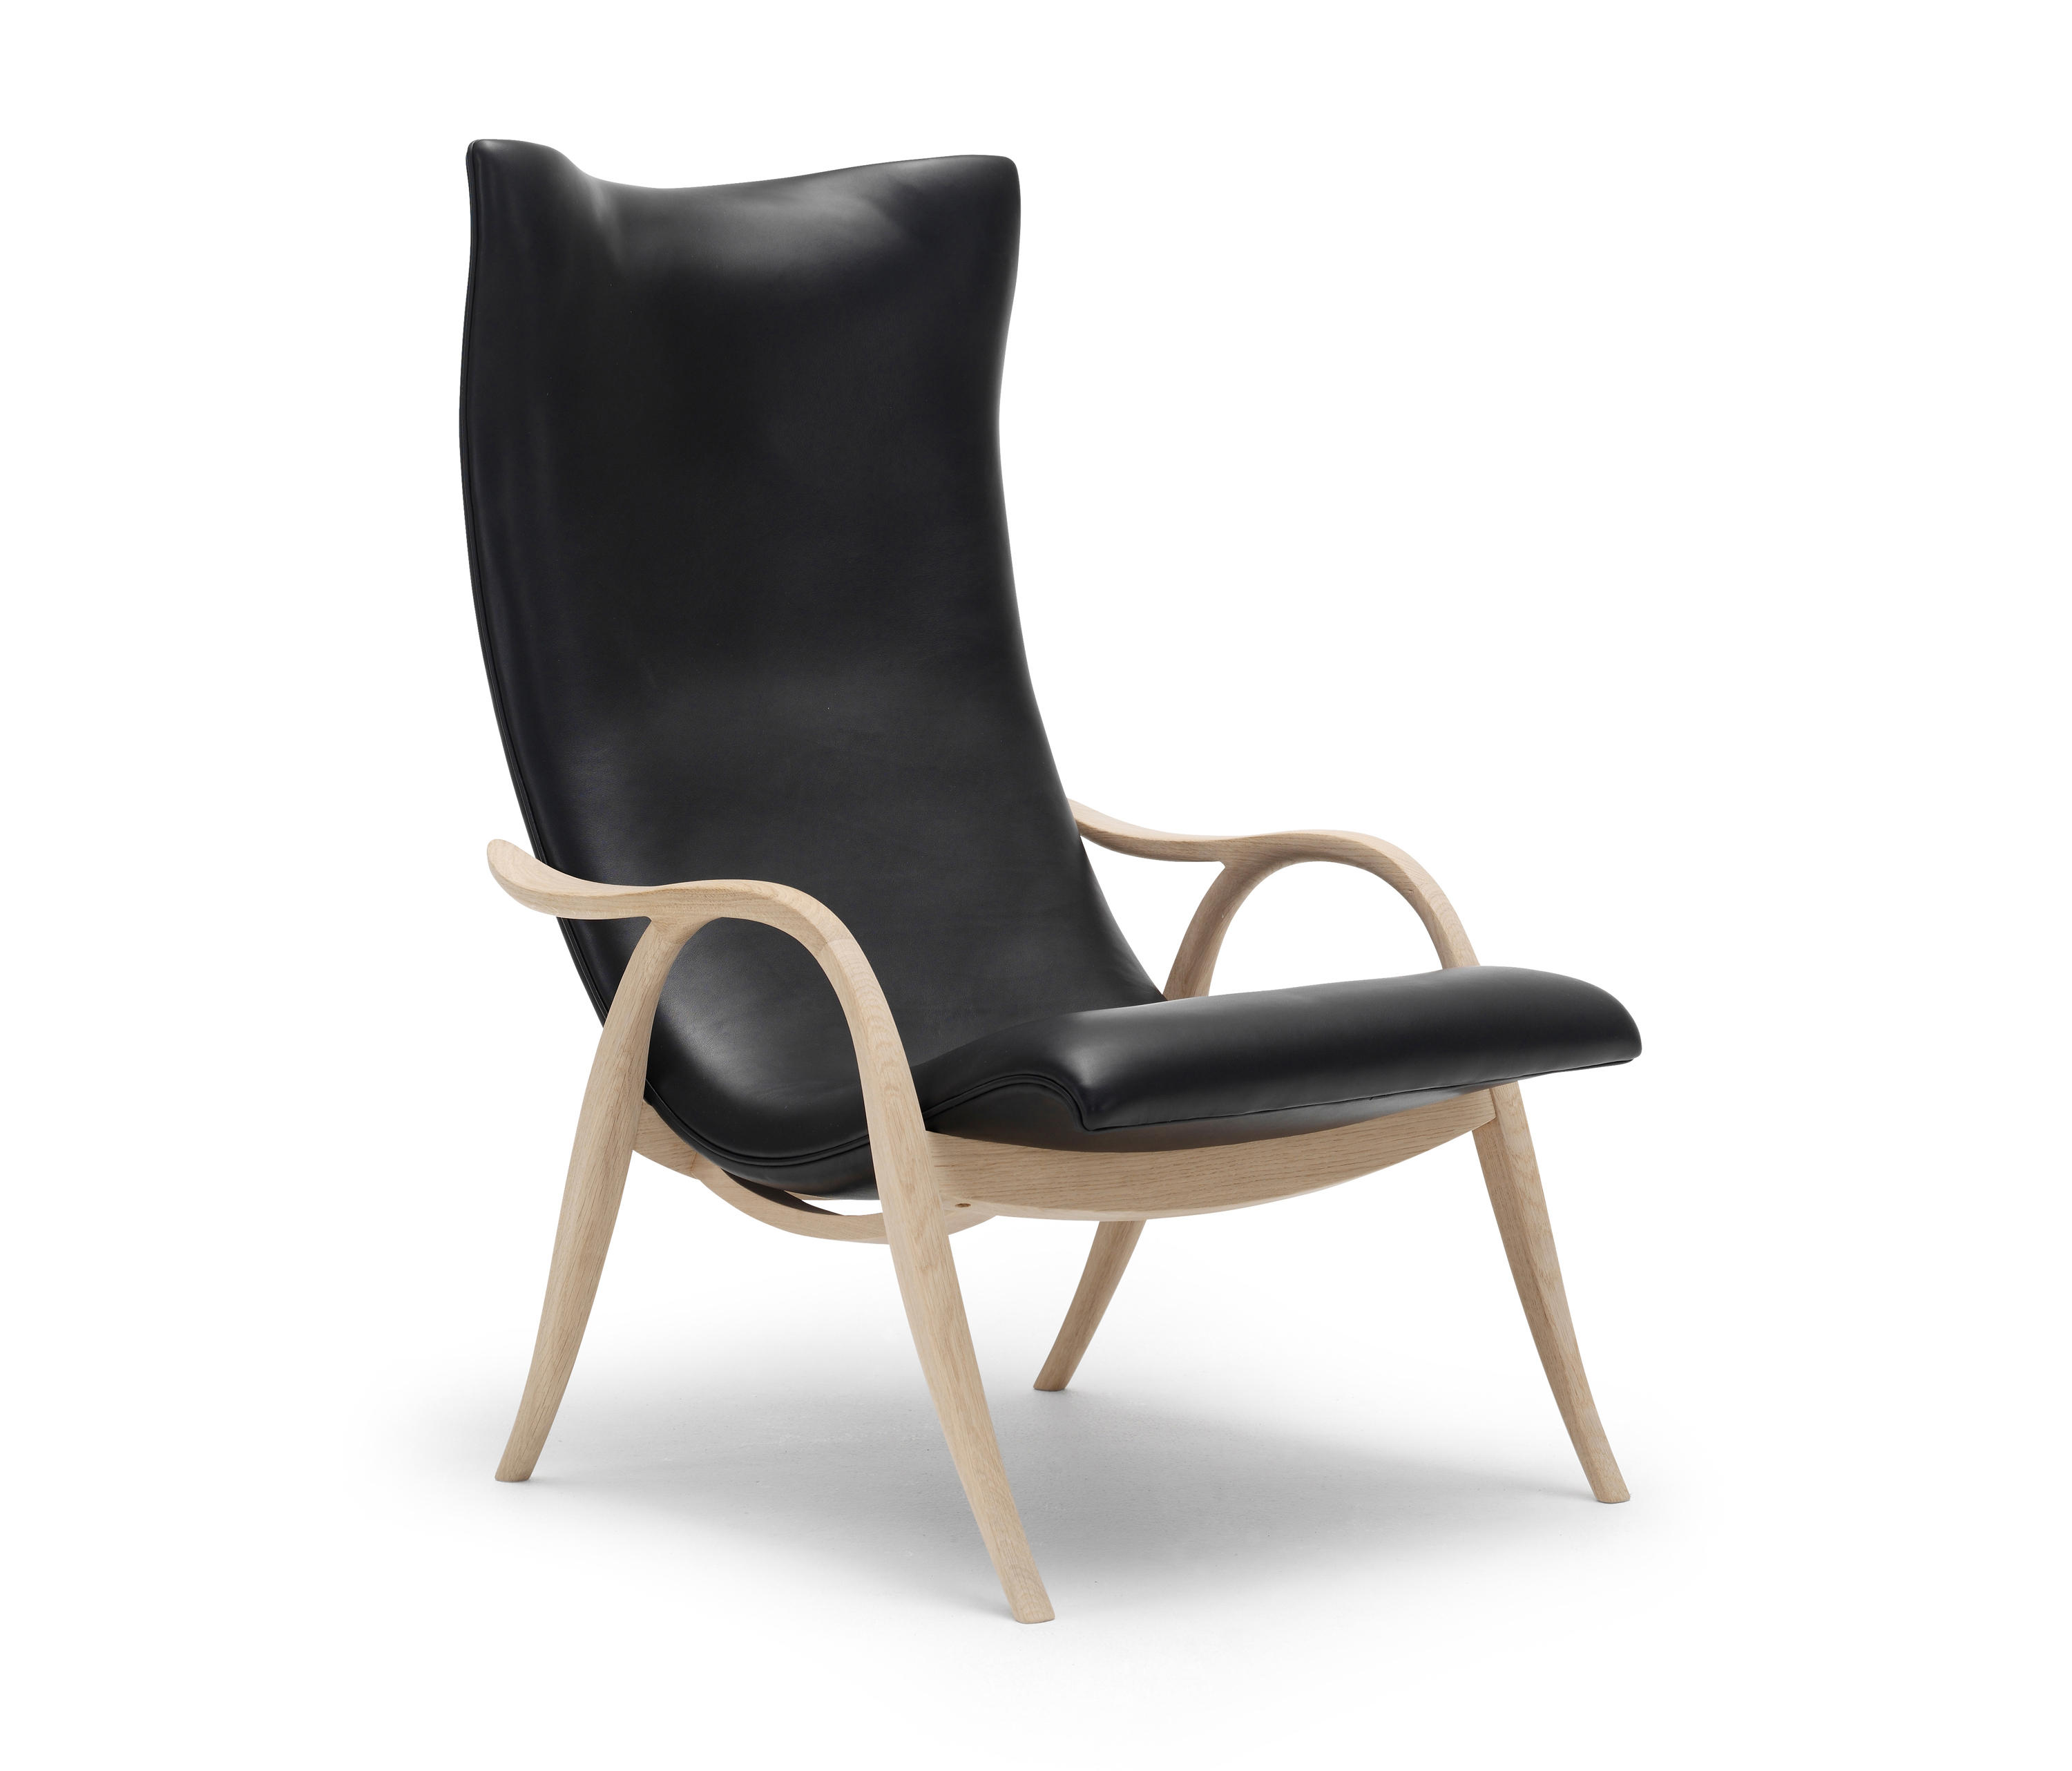 Signature Chair by Frits Henningsen